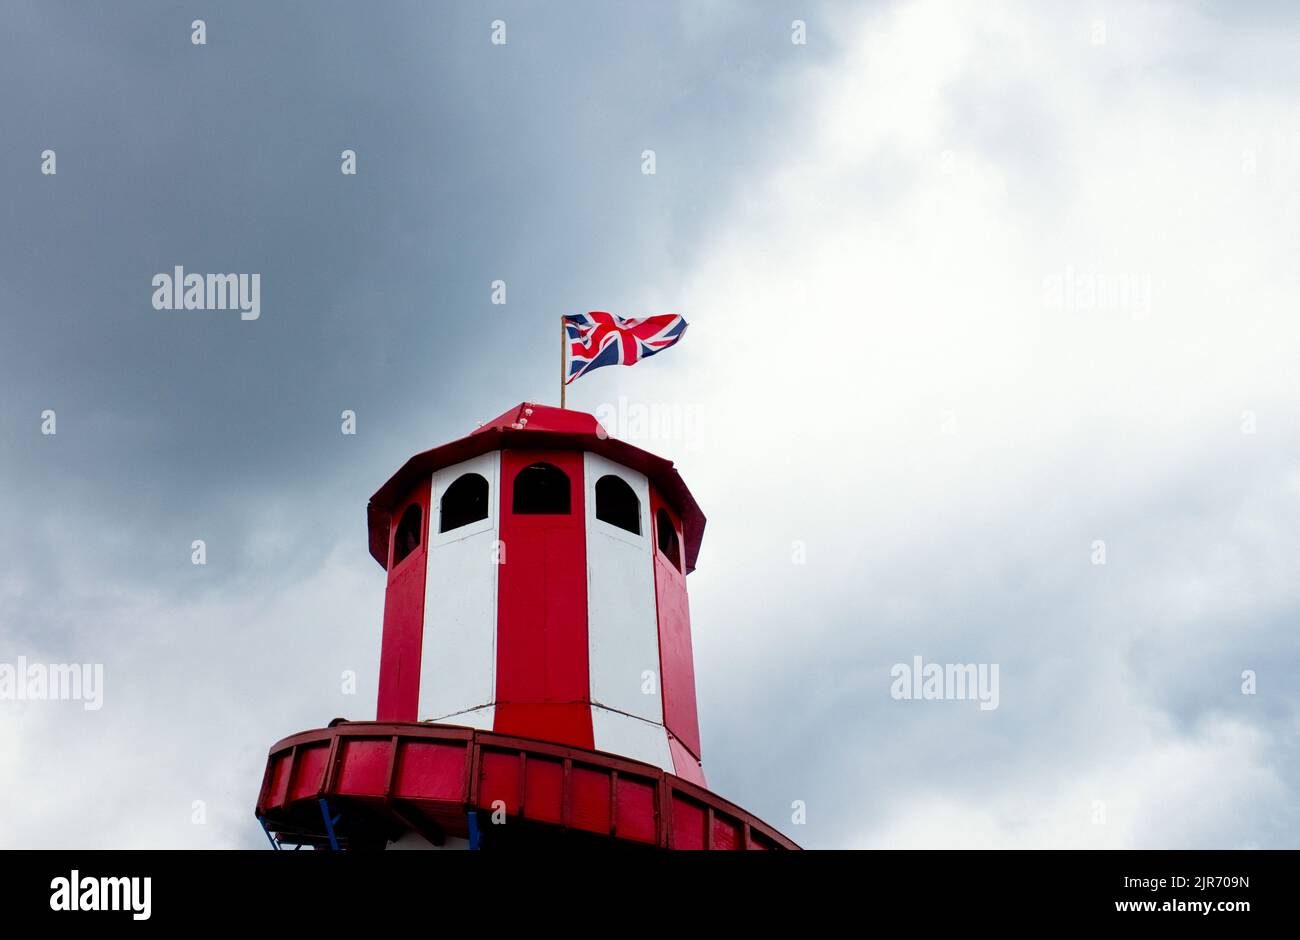 Looking up at a helter skelter with a union jack flag flying at the top against a dark cloudy sky Stock Photo